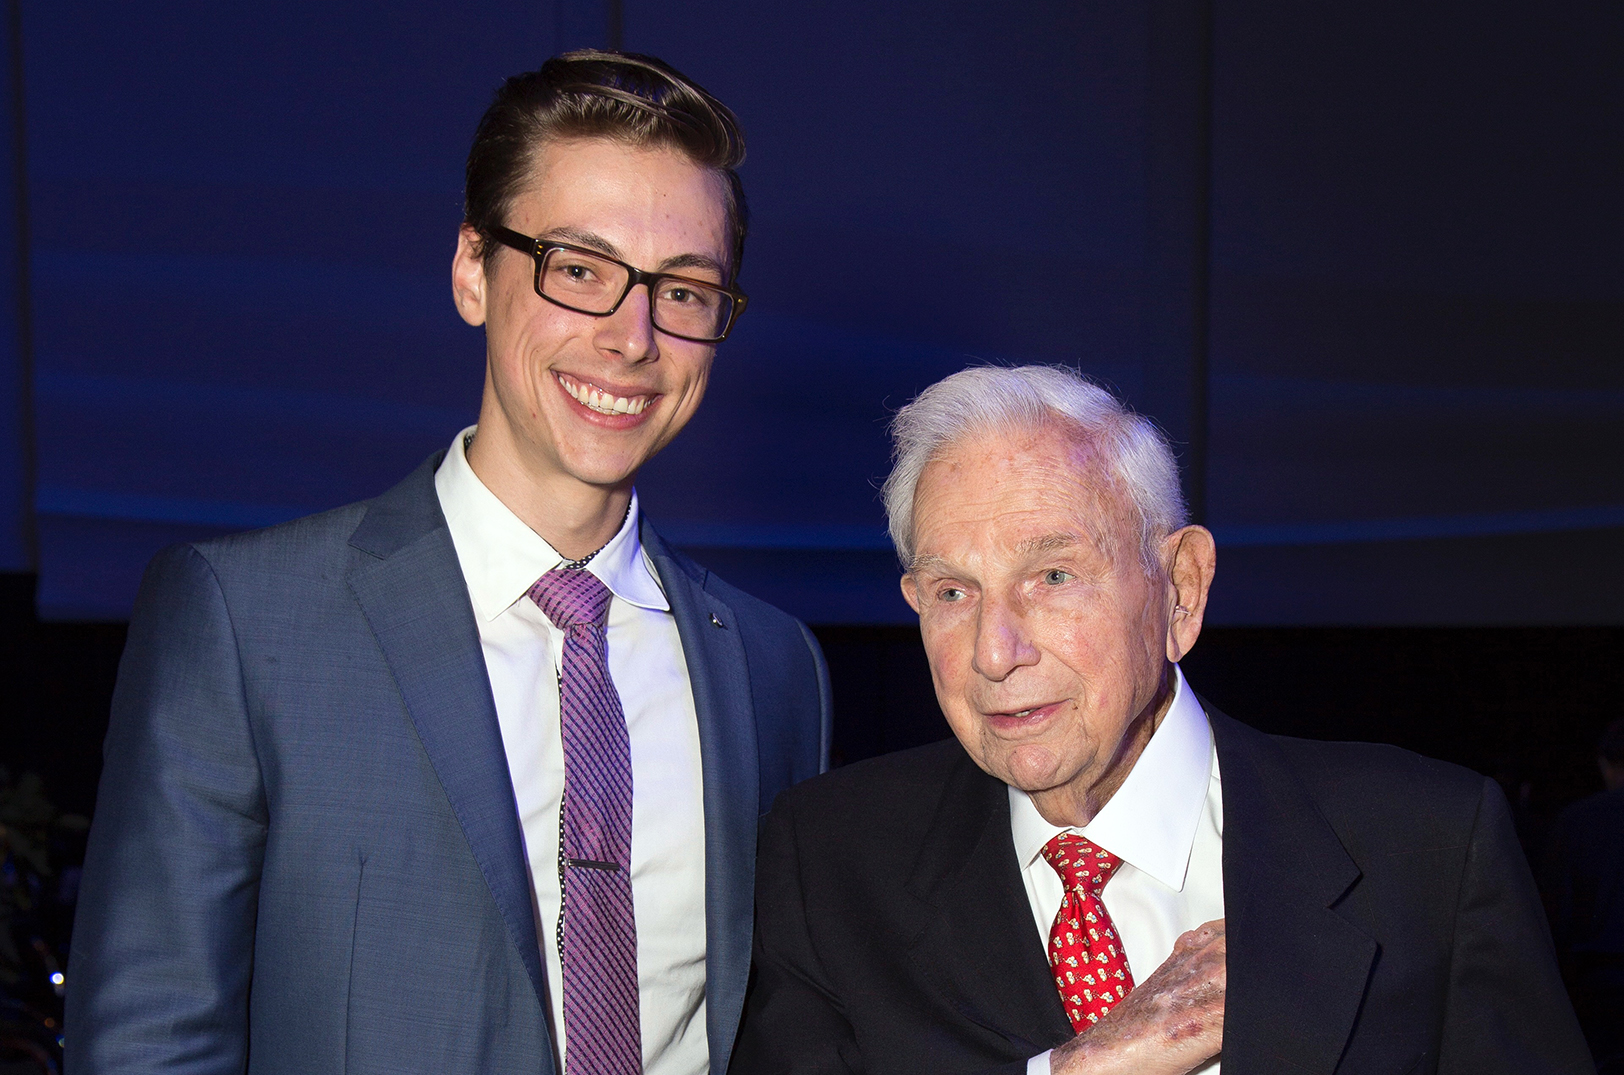 Zach Pettet: Henry Bloch gave KC a legacy to believe in; now it’s our turn to make him proud